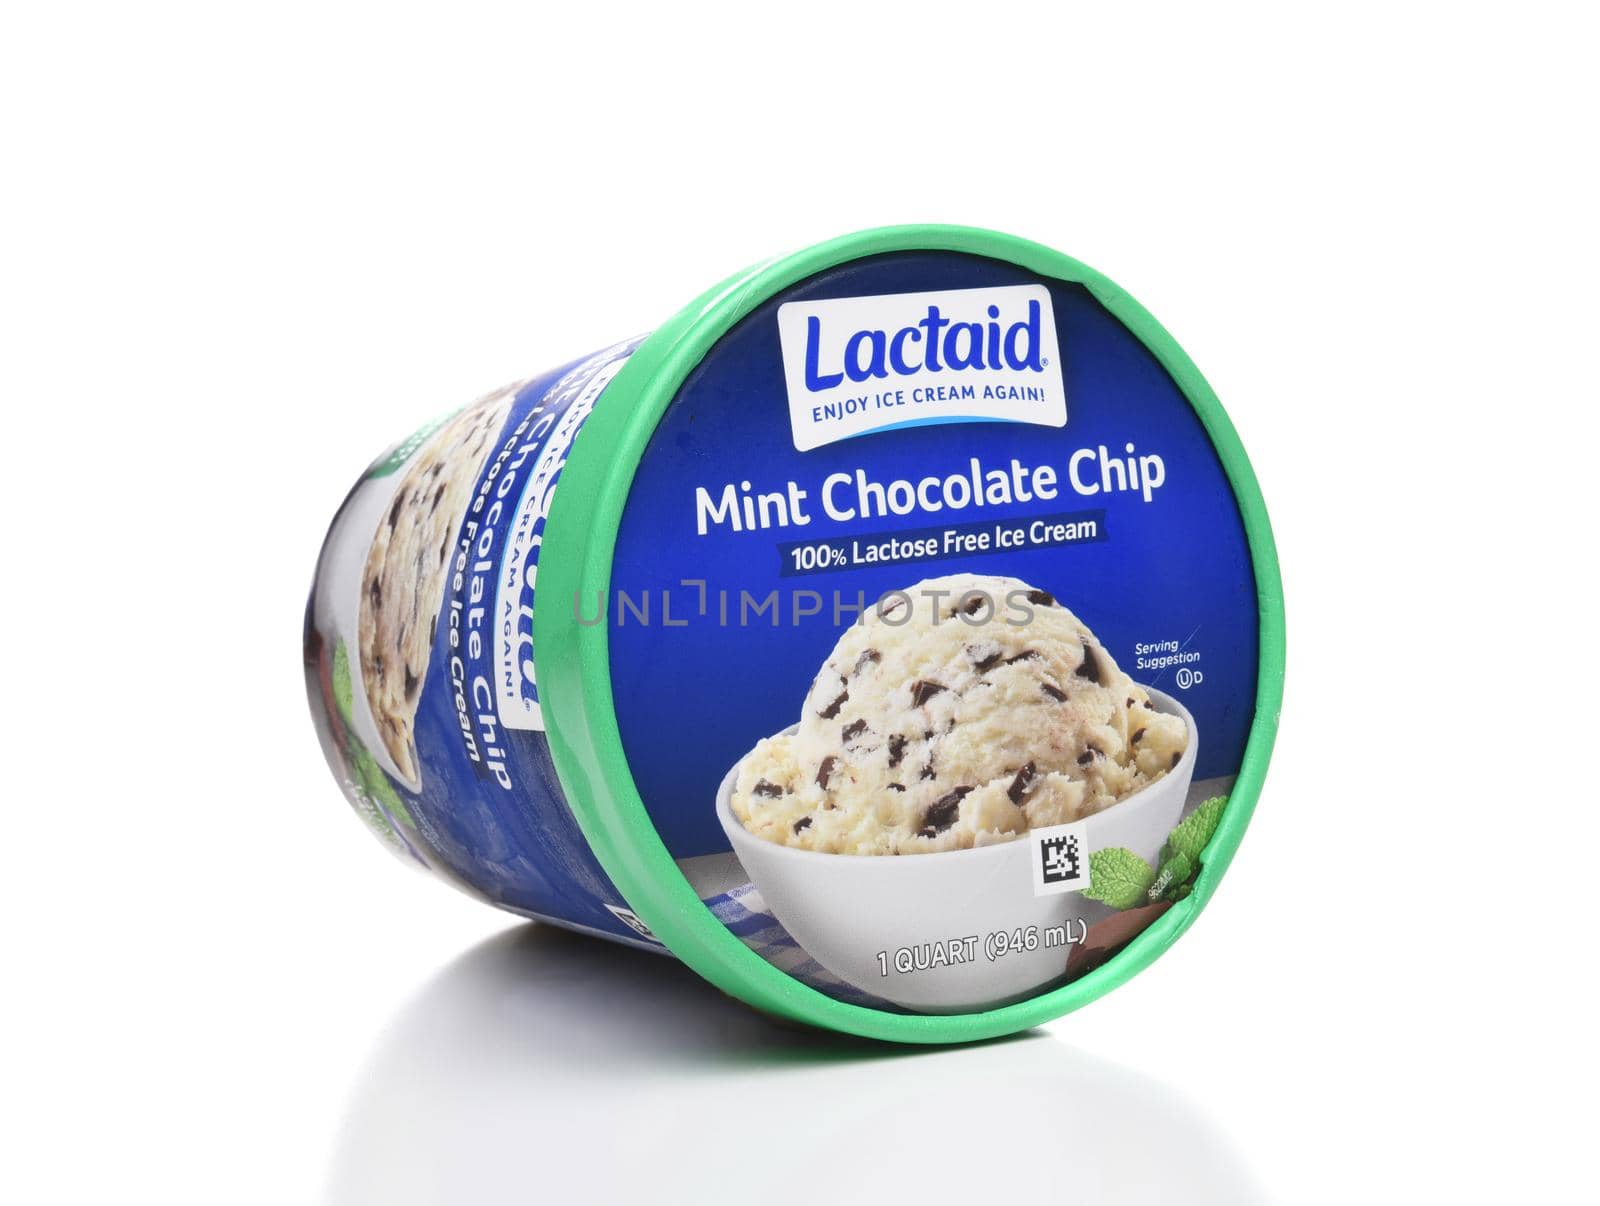 IRVINE, CA - AUGUST 6, 2018: A carton of Lactaid Lactose Free Mint Chocolate Chip Ice Cream. Lactaid makes a full line of lactose free dairy products that can be enjoyed without stomach discomfort.